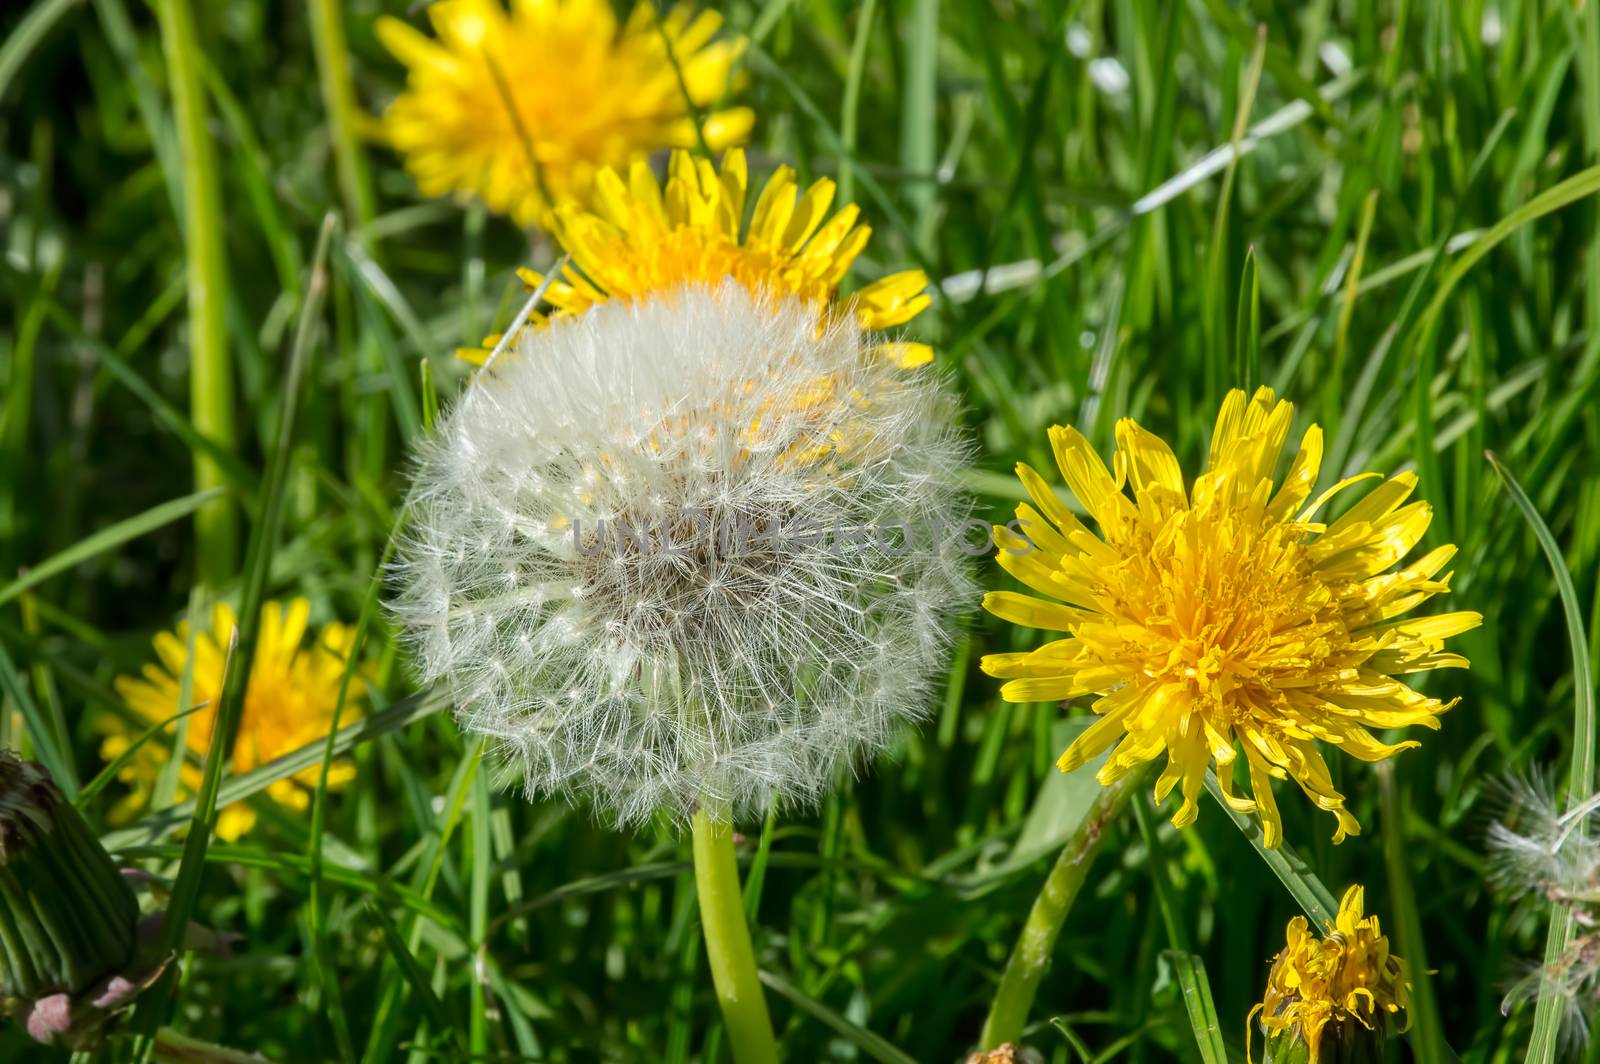 Flowering and Seeding Dandelions by Russell102